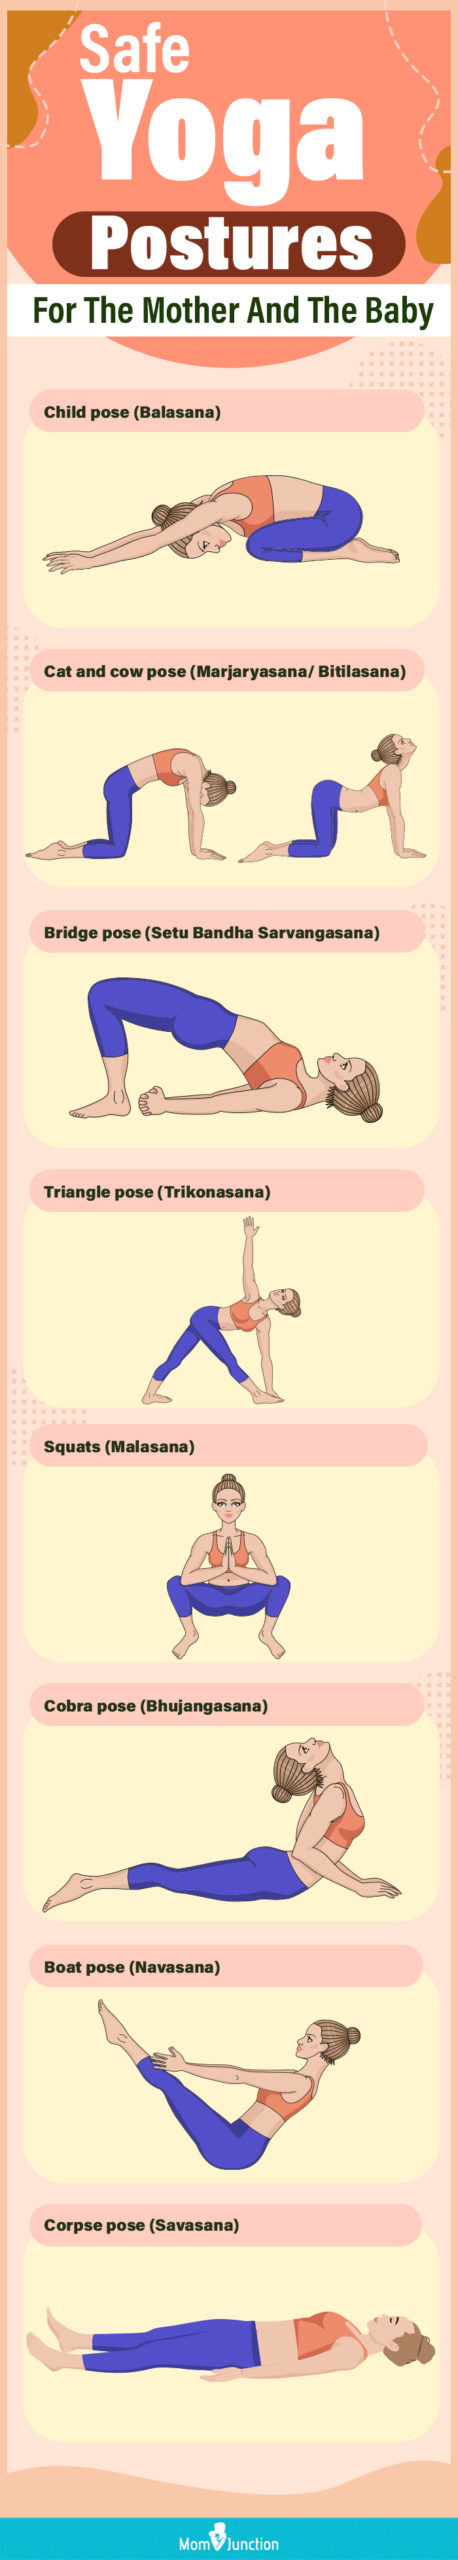 Yoga poses for Urinary Incontinence | Cure leaking Urine issue